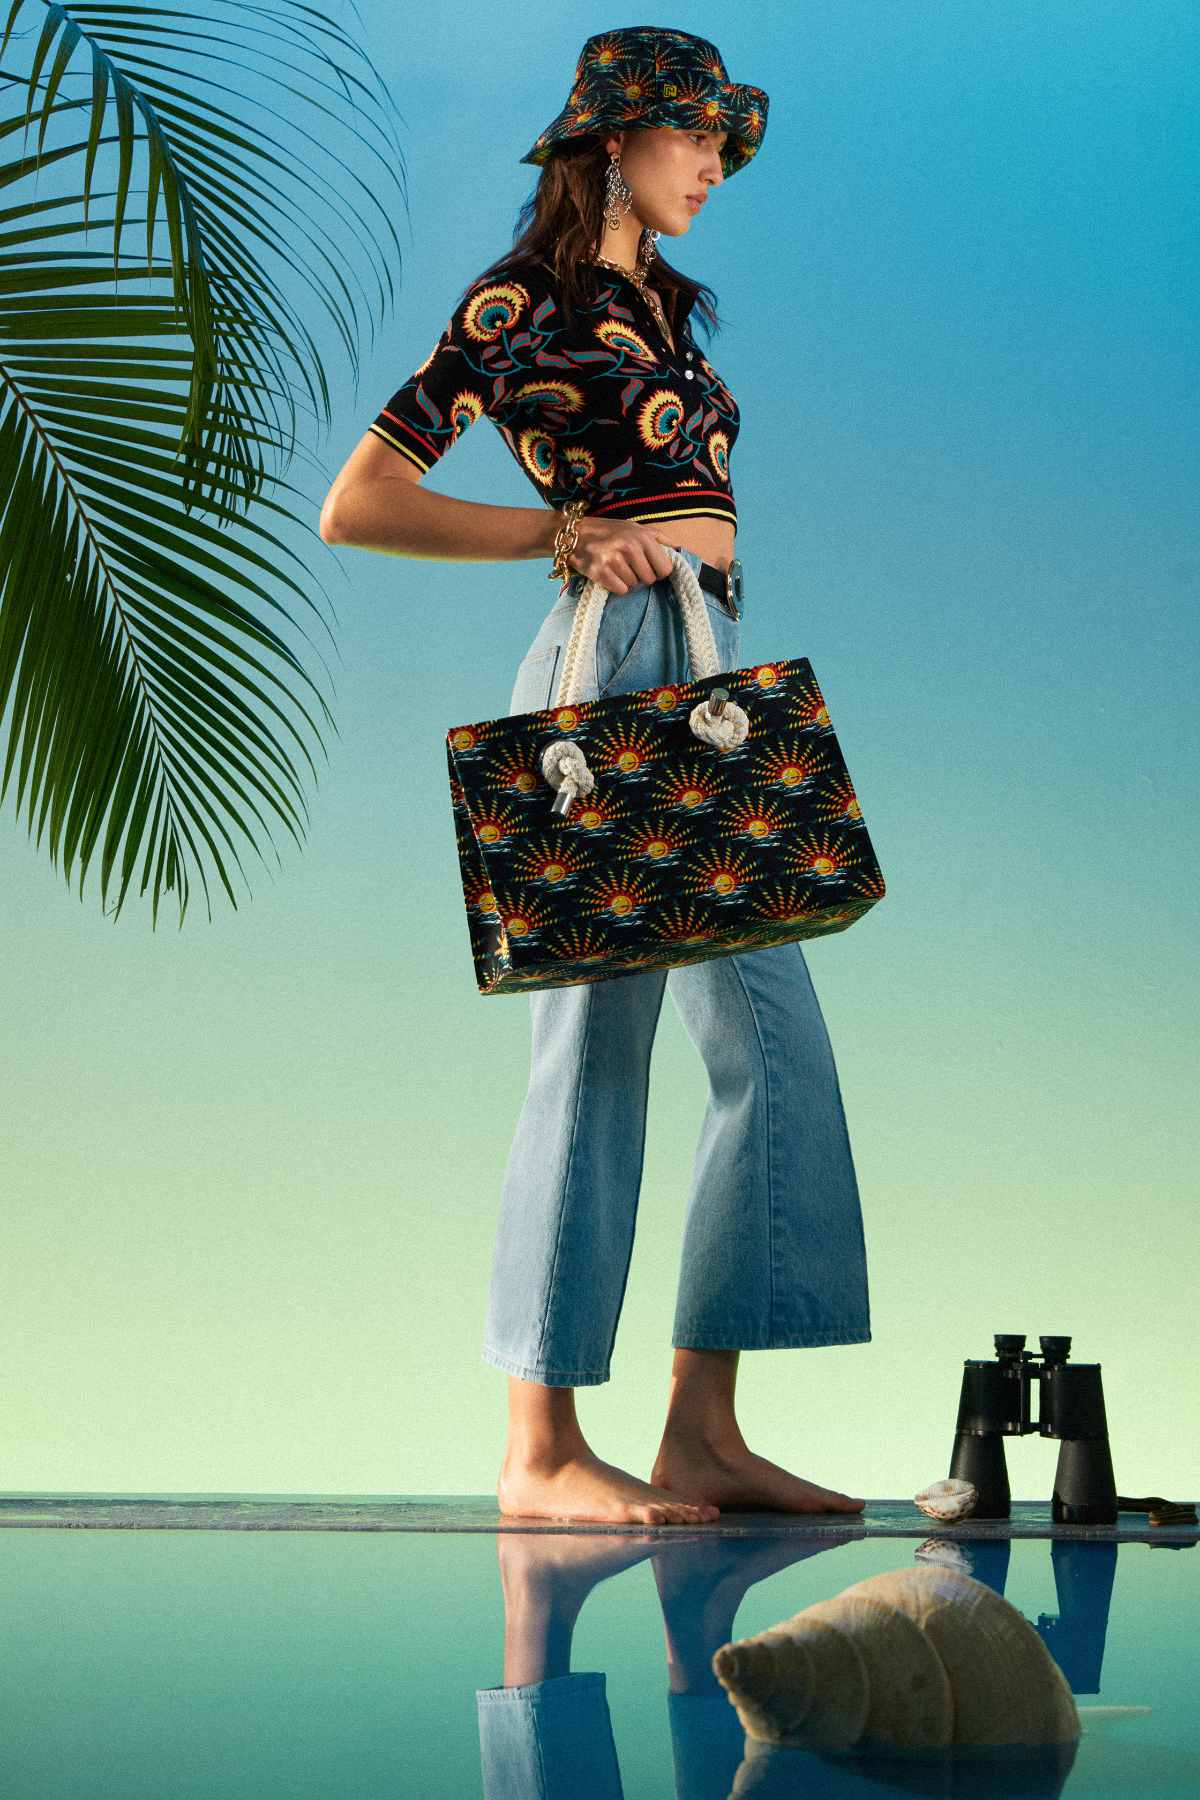 Paco Rabanne Presents Its New Summer Holiday 2022 Capsule Collection: Endless Sunset